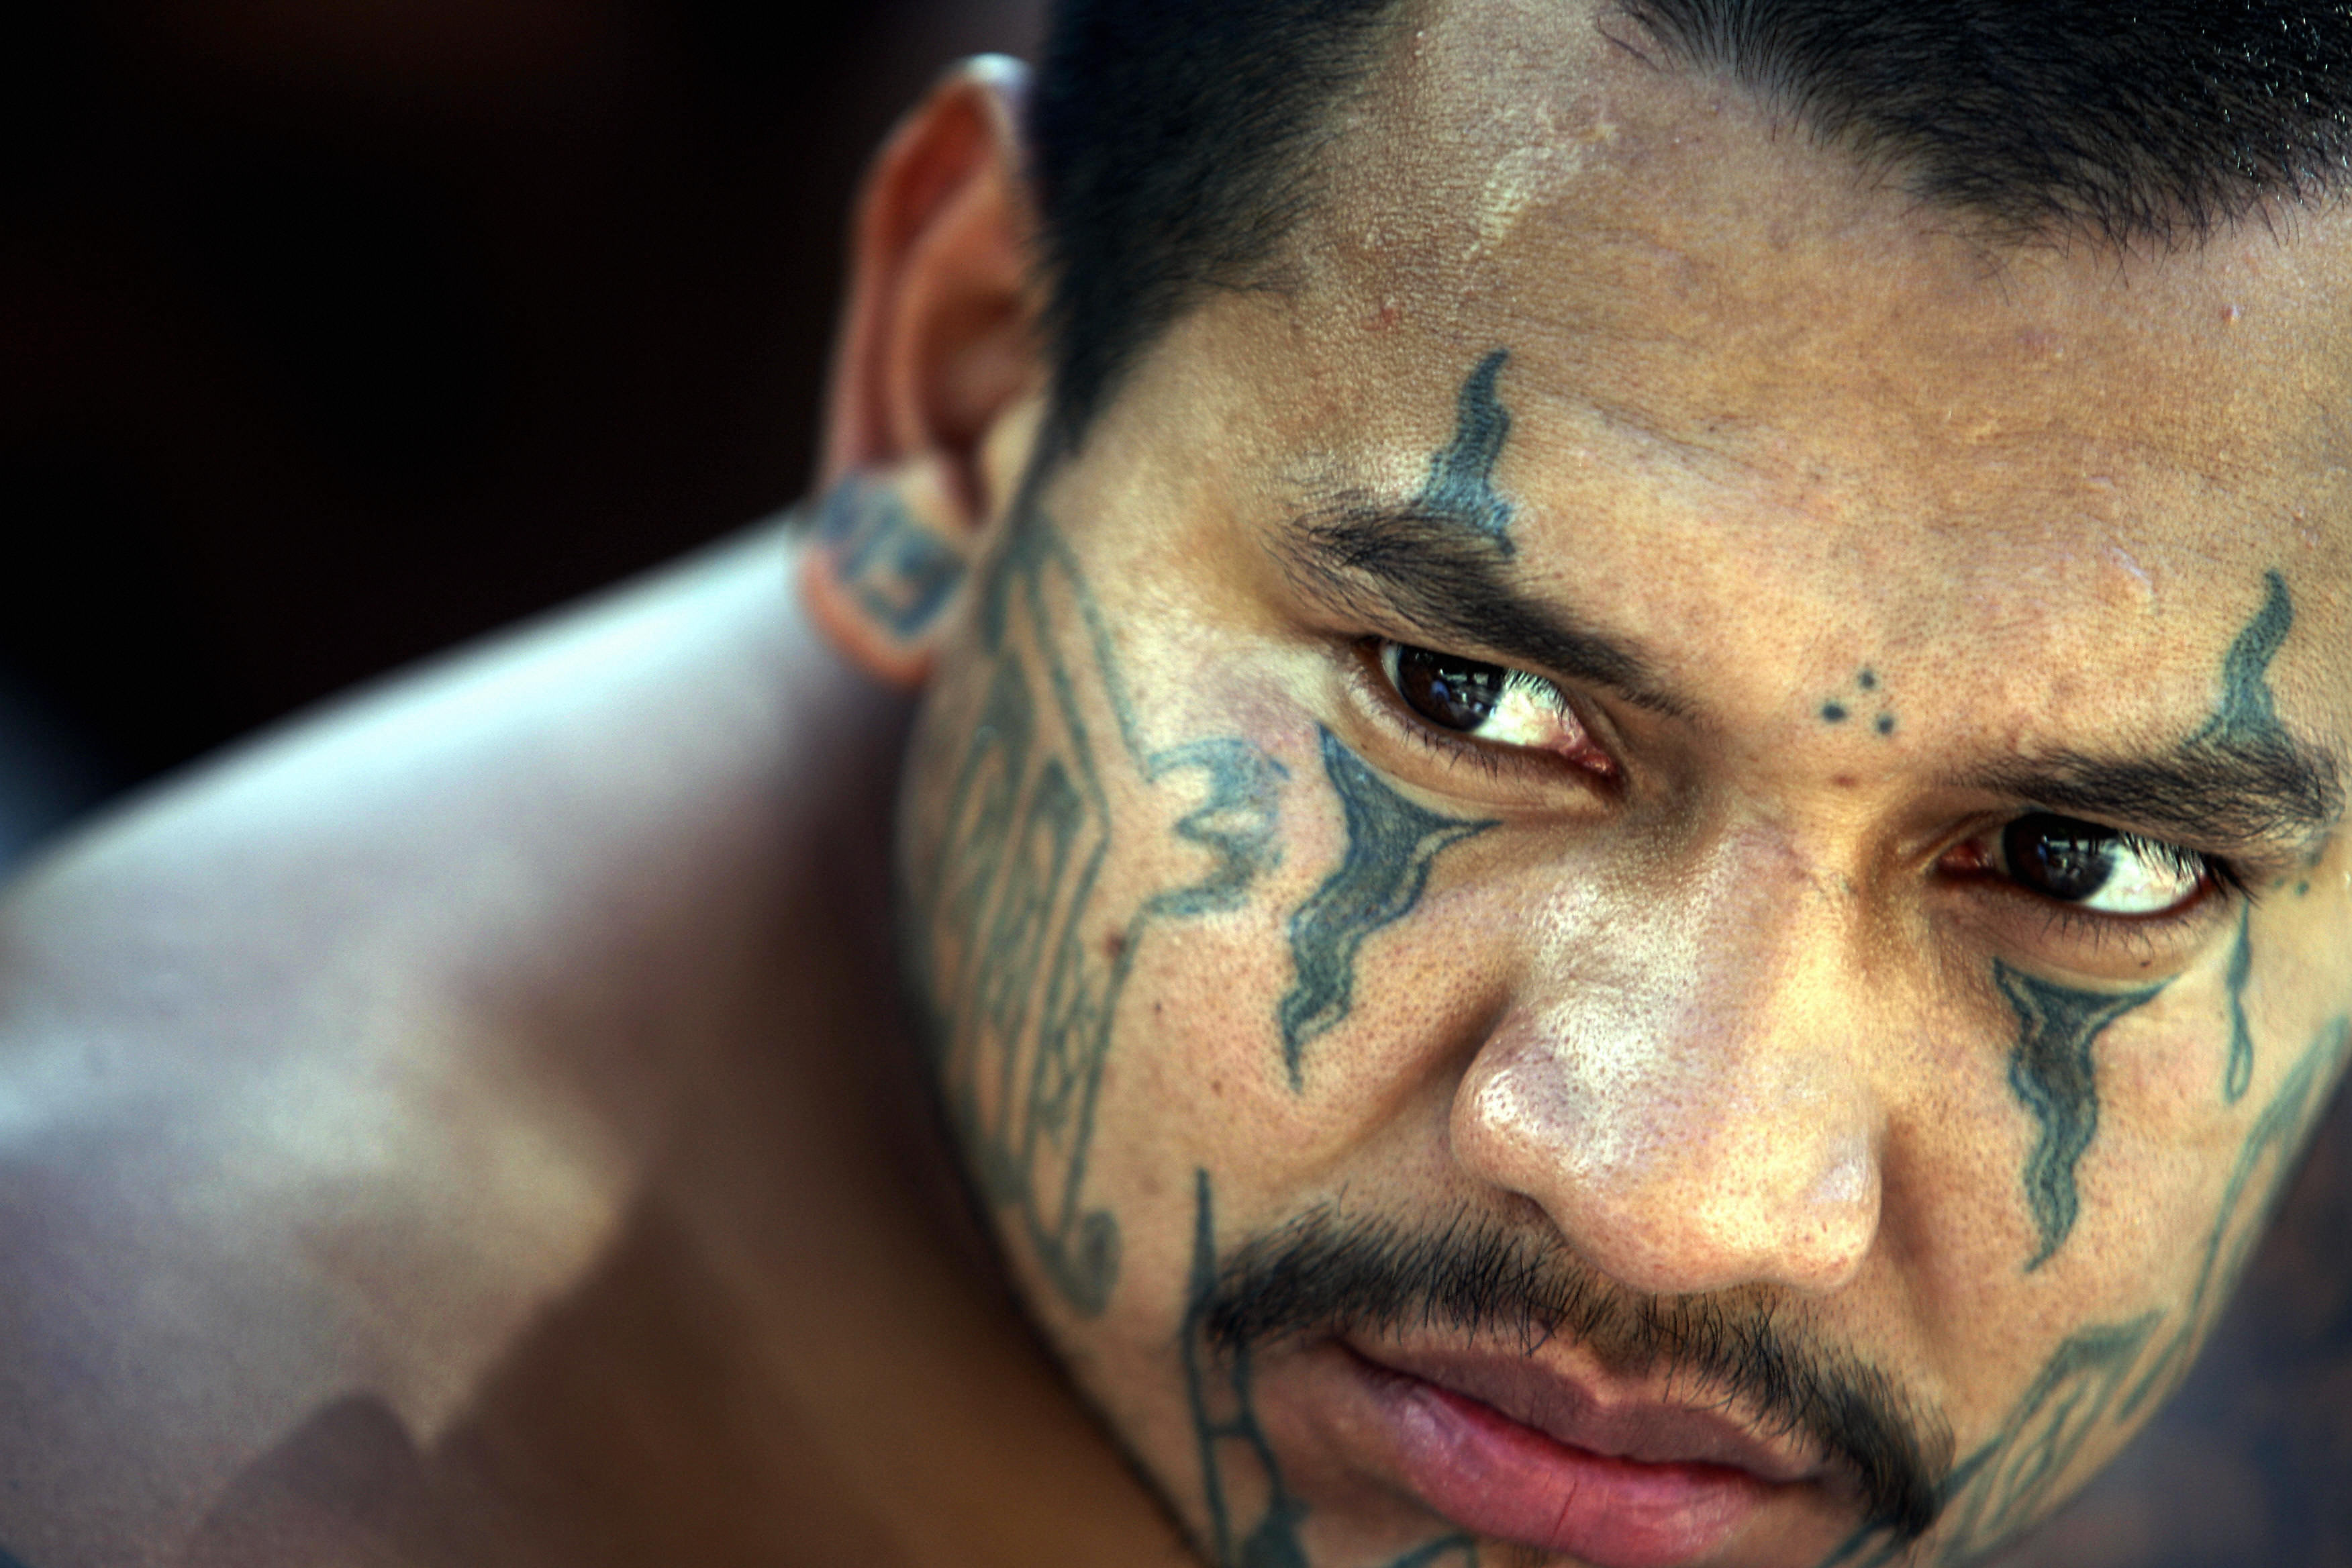 A member of the "Mara Salvatrucha" gang is presented to the press in San Salvador on September 7th, 2006, after his arrest last night. (Yuri Cortez/AFP/Getty Images)